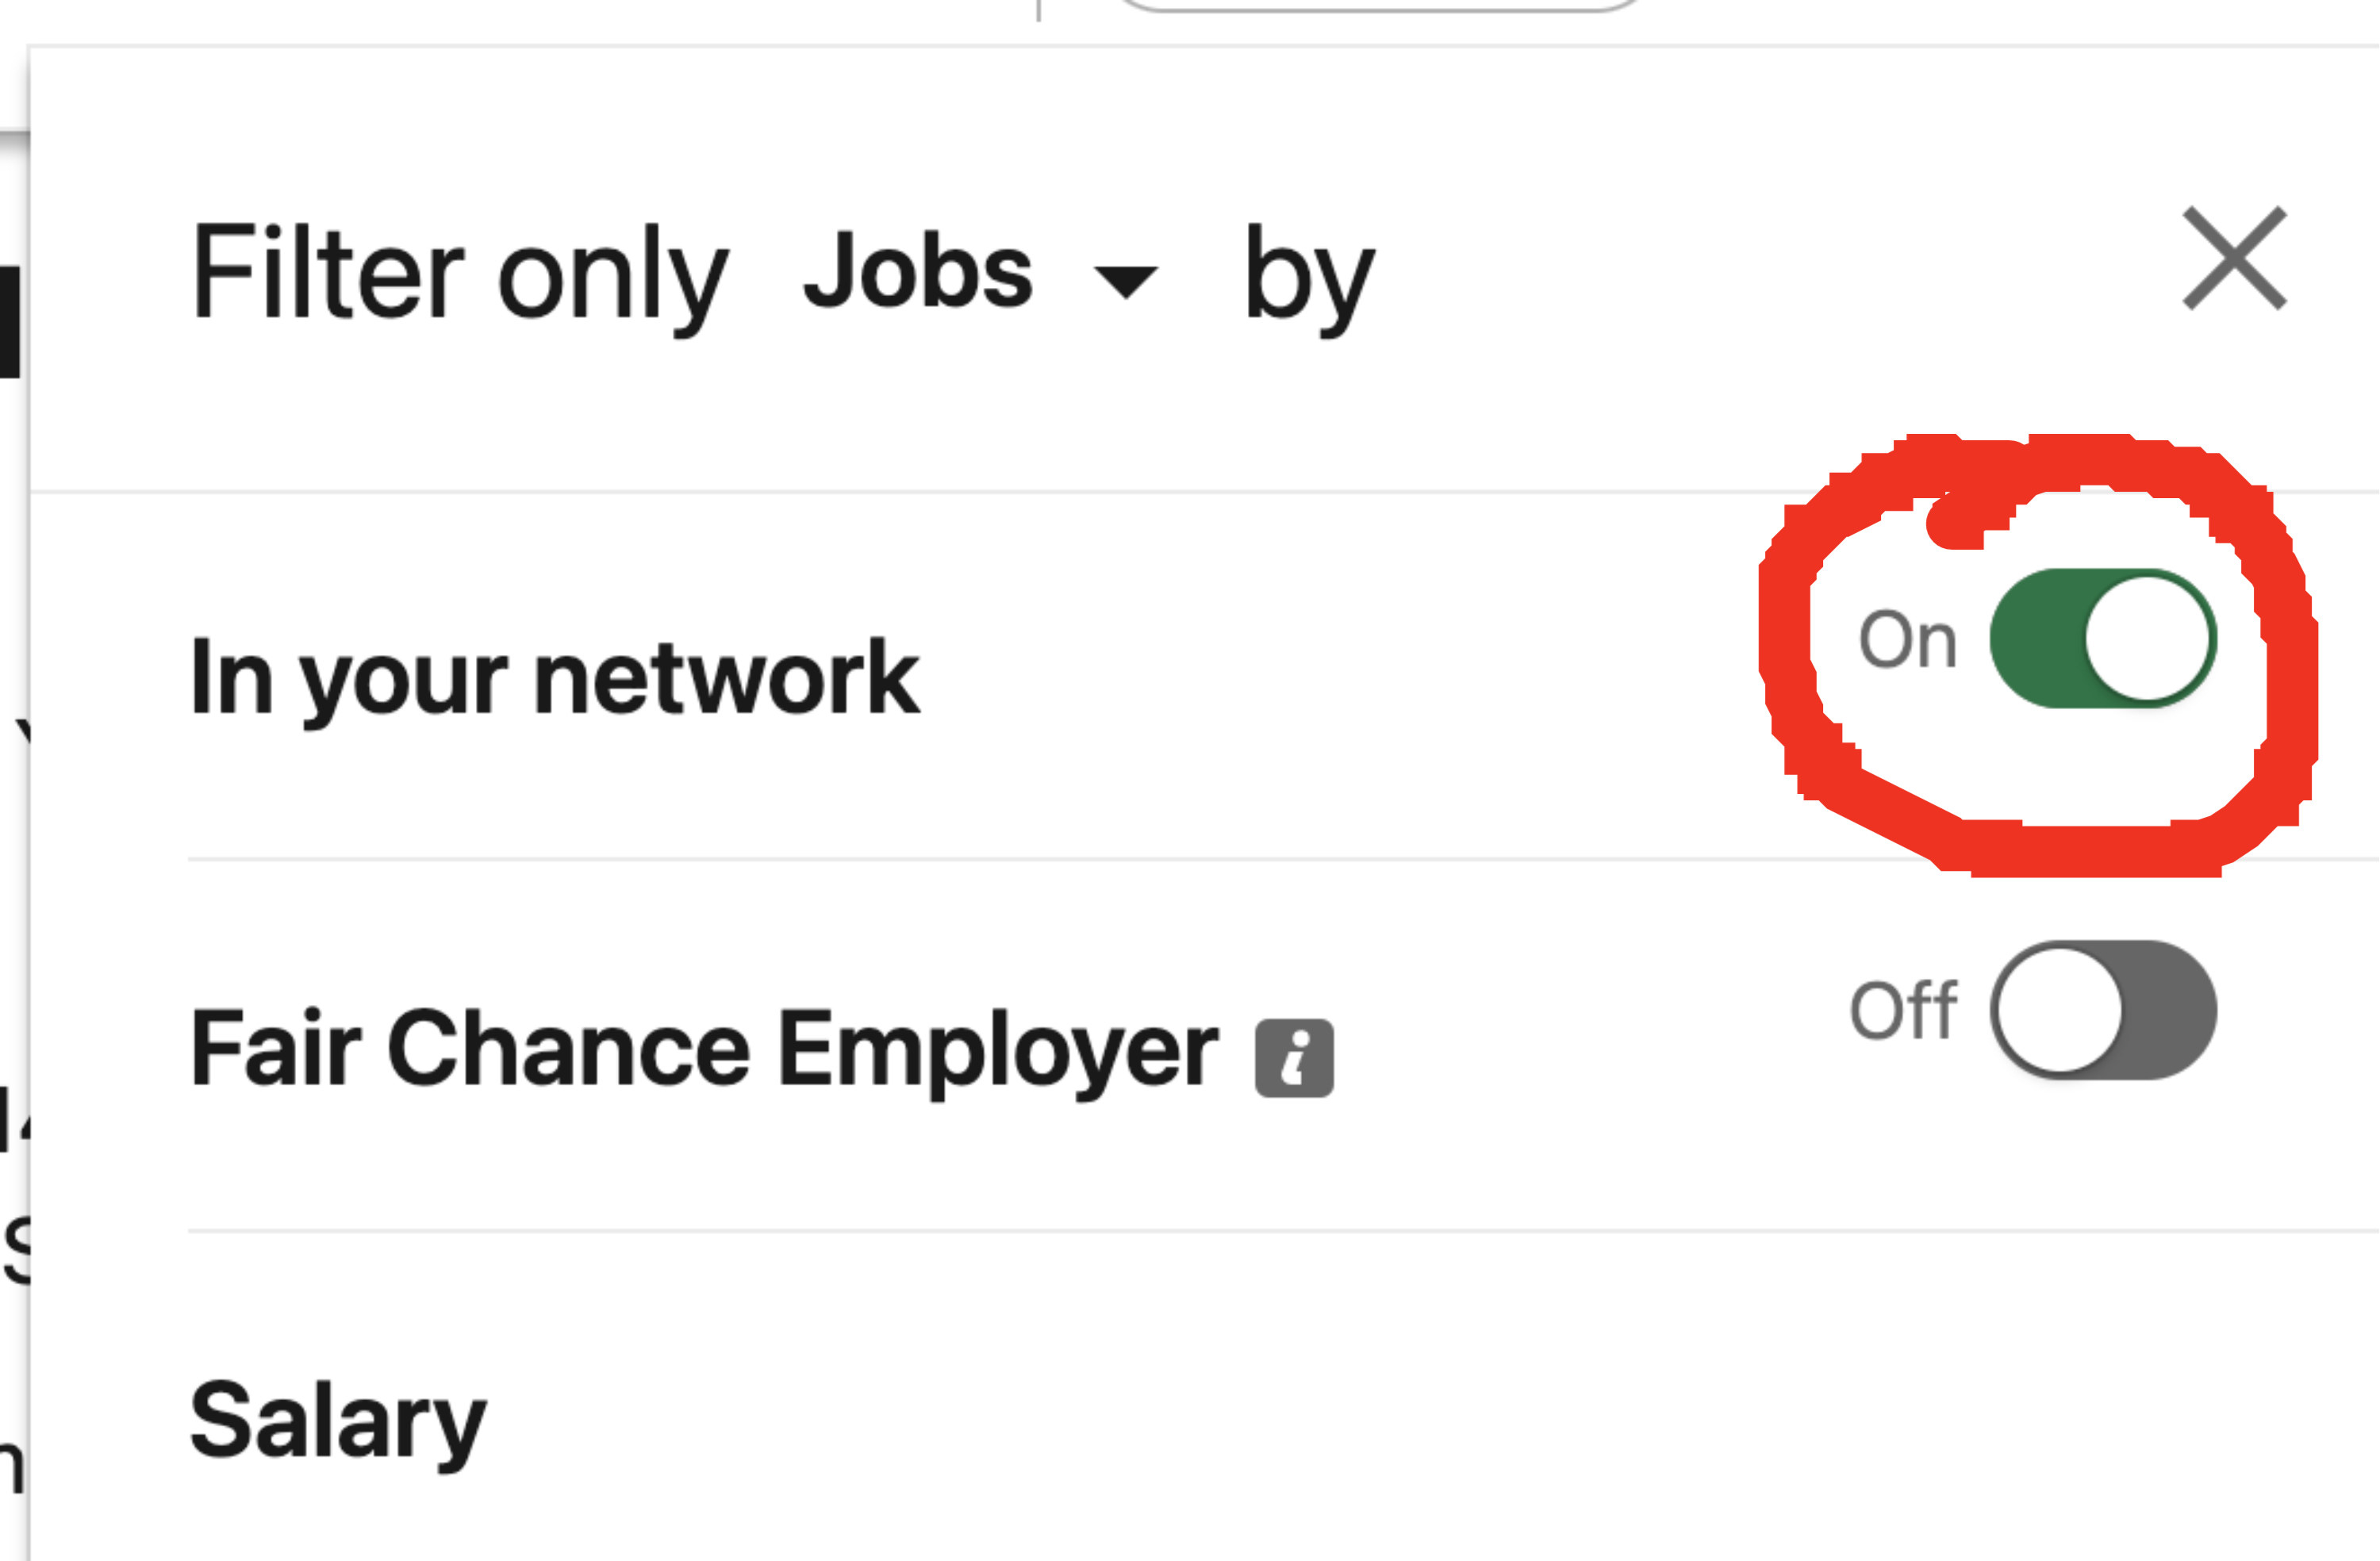 LinkedIn job search filters with in your network toggled on